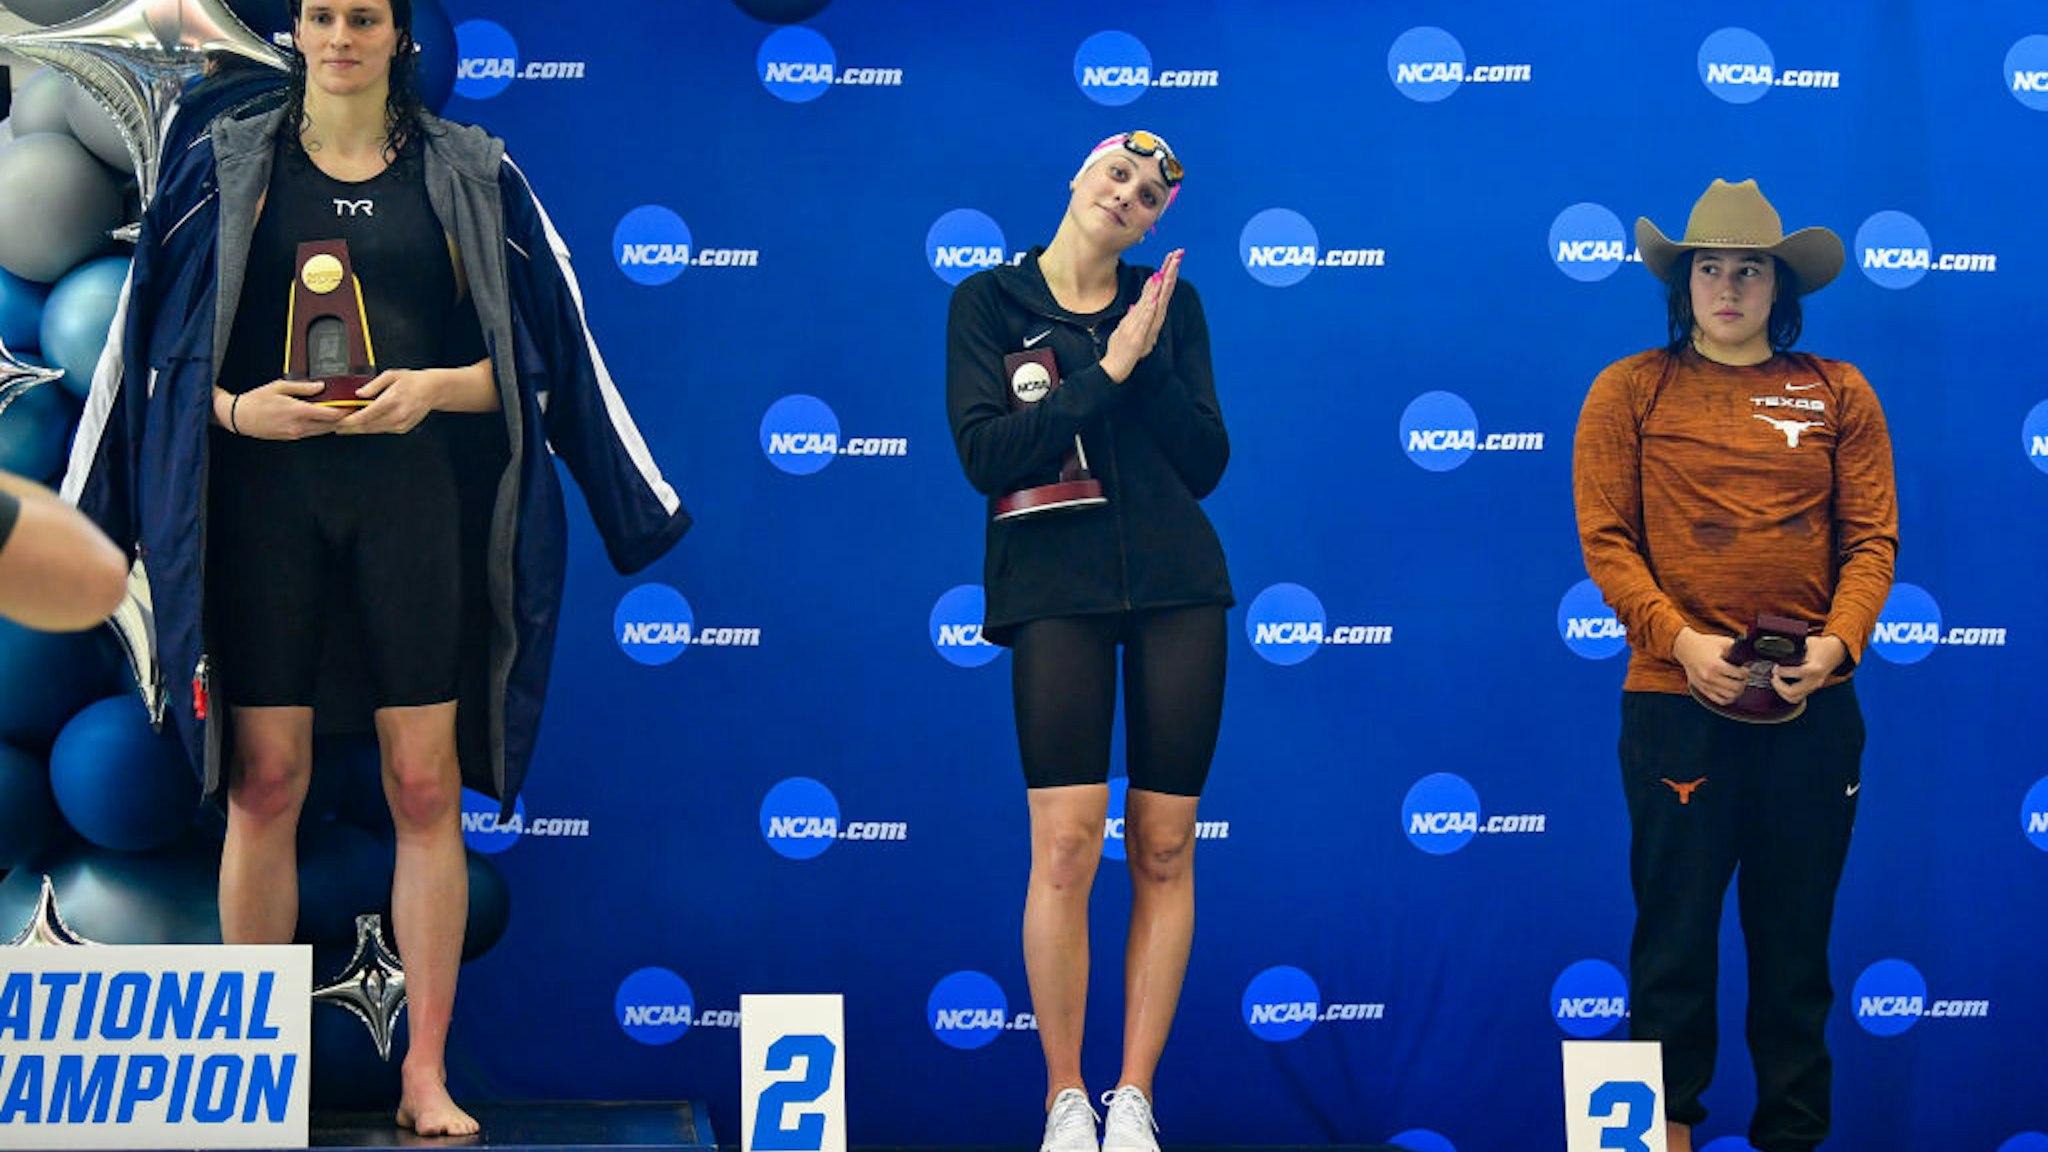 ATLANTA, GA - MARCH 17: University of Pennsylvania swimmer Lia Thomas accepts the winning trophy for the 500 Freestyle finals as second place finisher Emma Weyant and third place finisher Erica Sullivan watch during the NCAA Swimming and Diving Championships on March 17th, 2022 at the McAuley Aquatic Center in Atlanta Georgia. (Photo by Rich von Biberstein/Icon Sportswire via Getty Images)